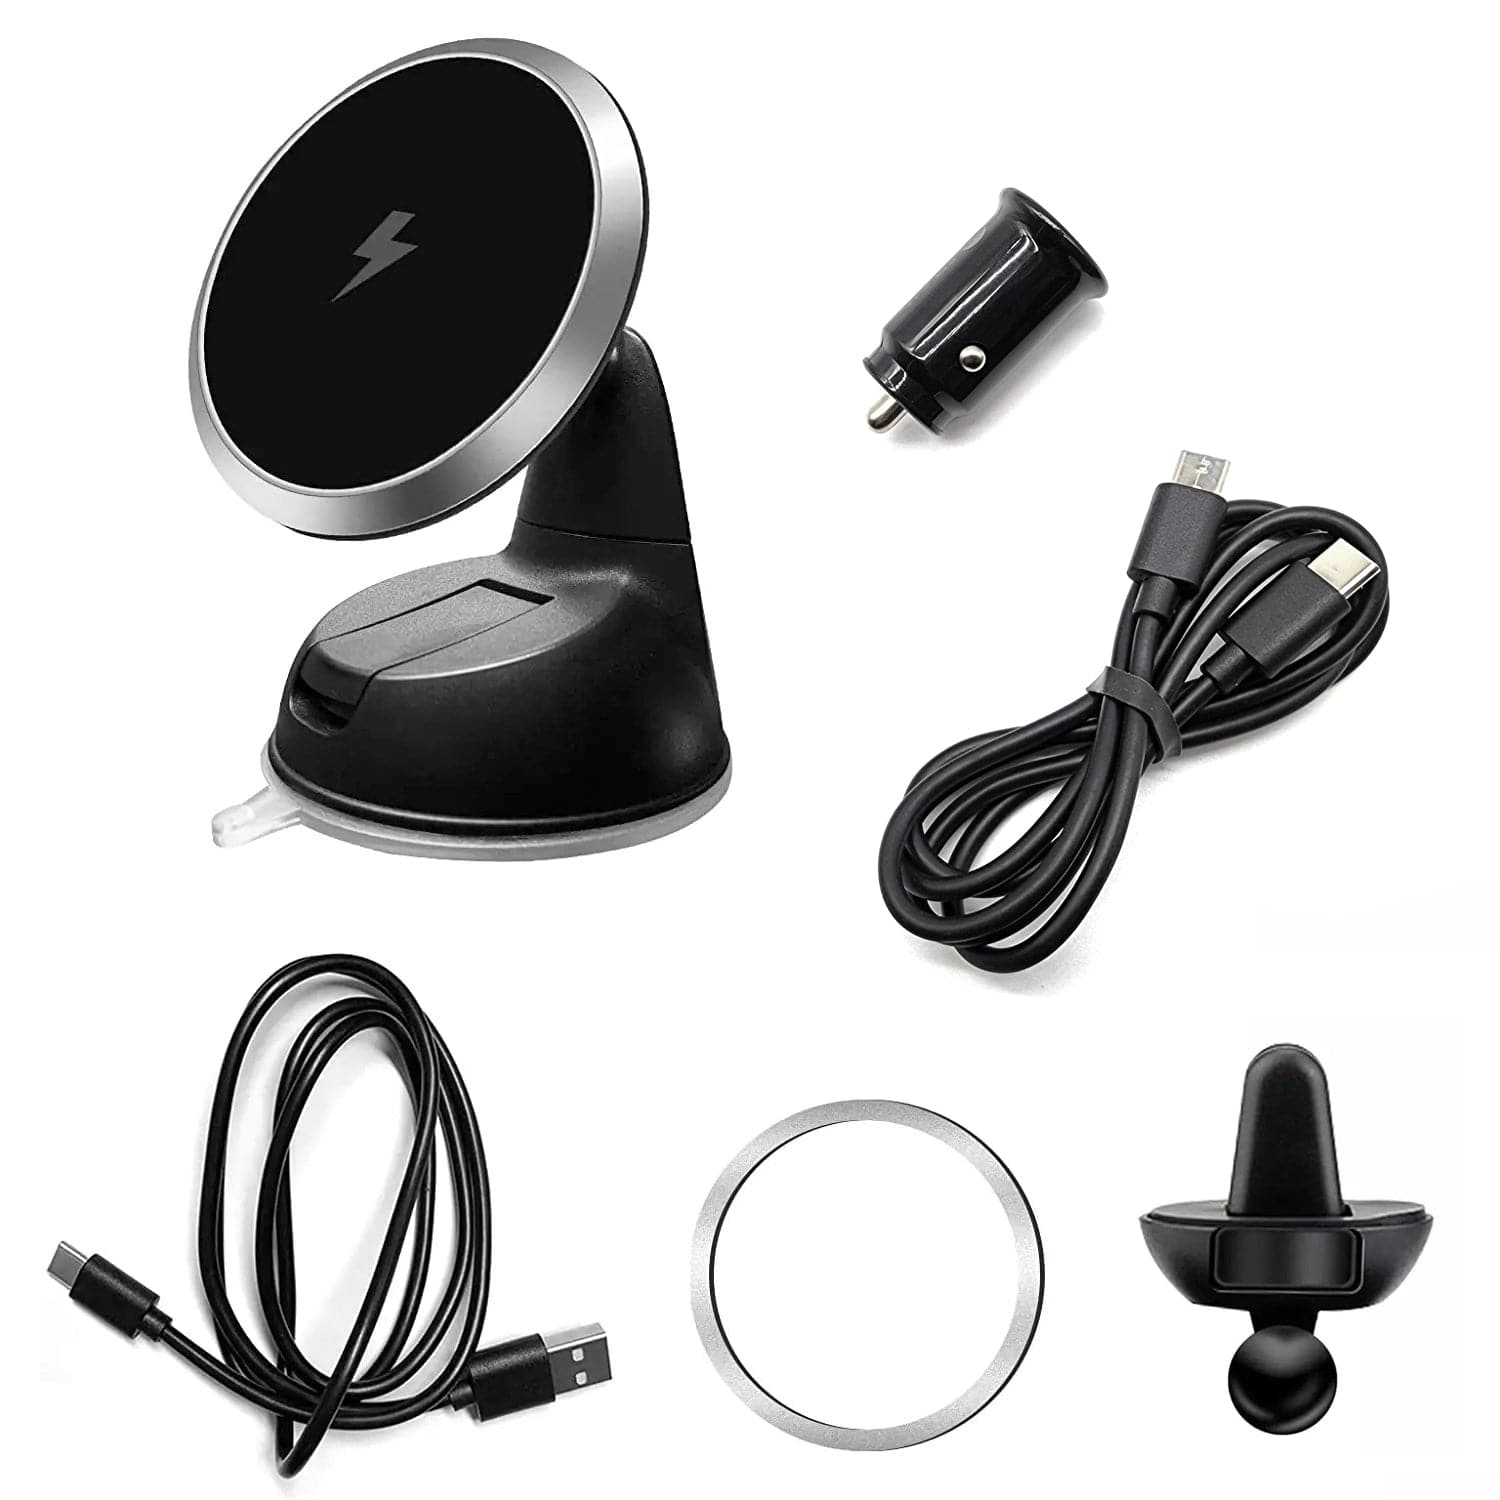 MAGNETIC WIRELESS PHONE CHARGER CRADLE KIT